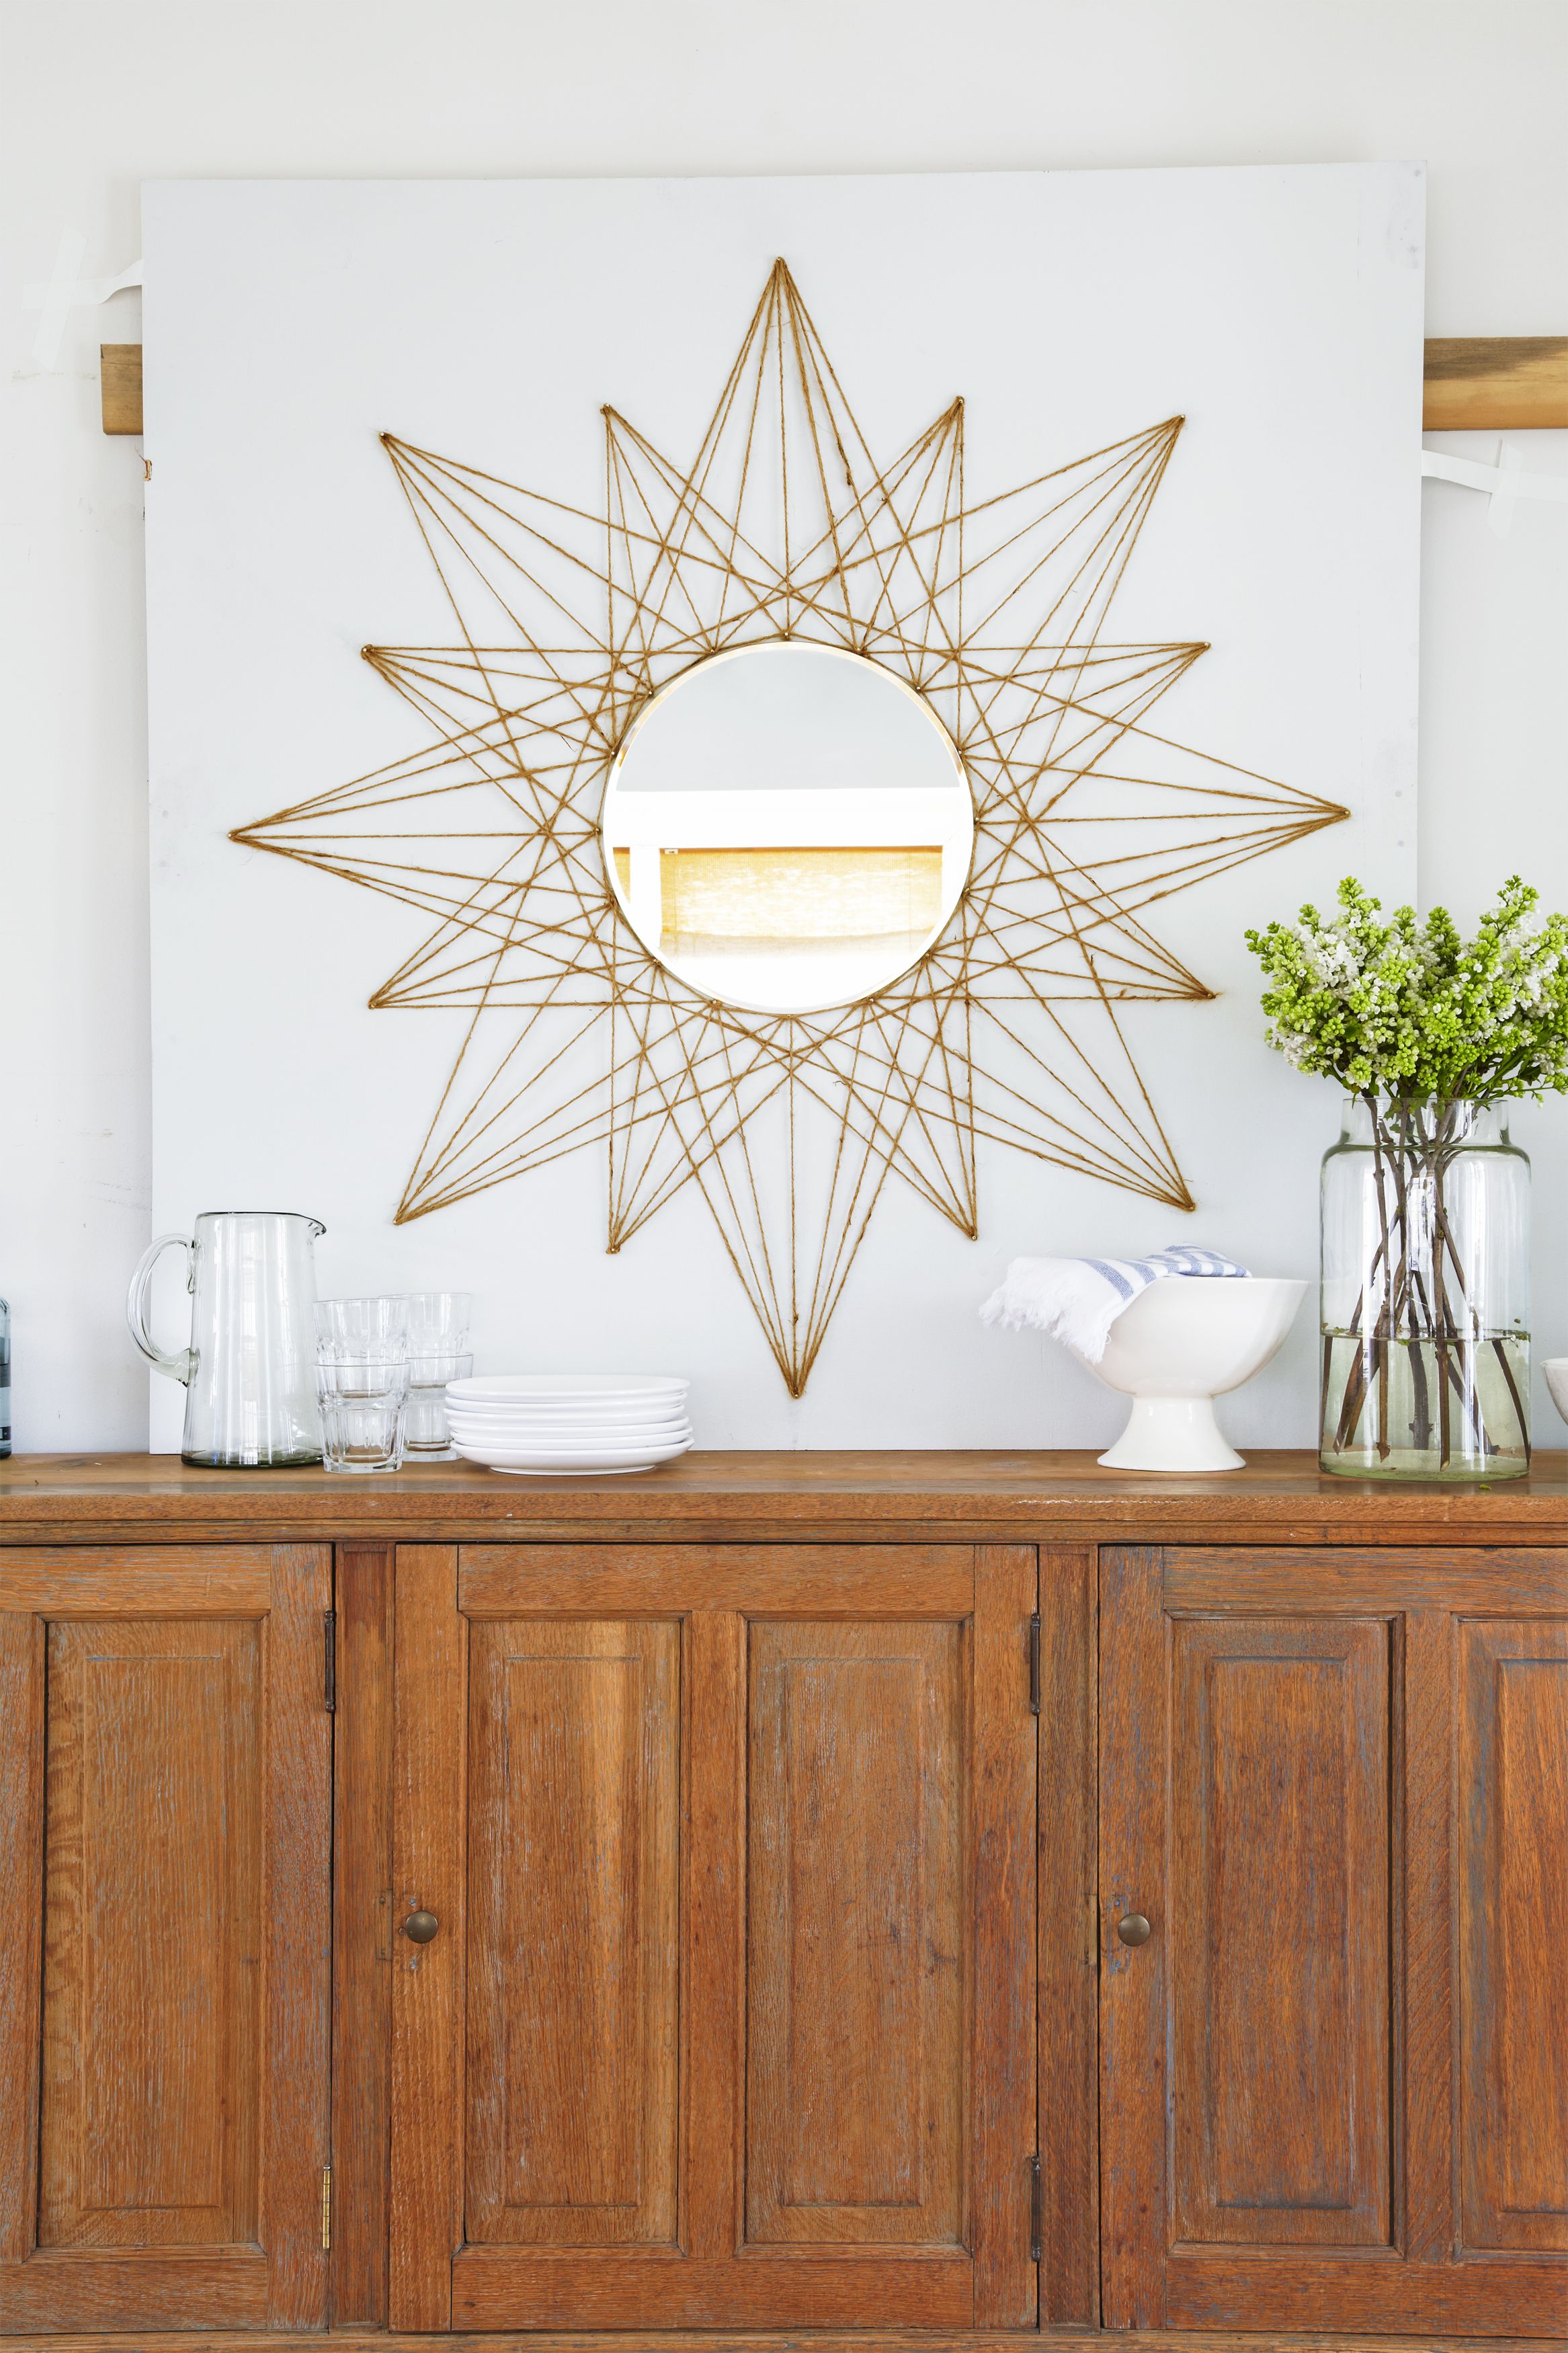 How To Make Easy Diy Star Rope Mirror, How To Hang A Mirror On Wall With String